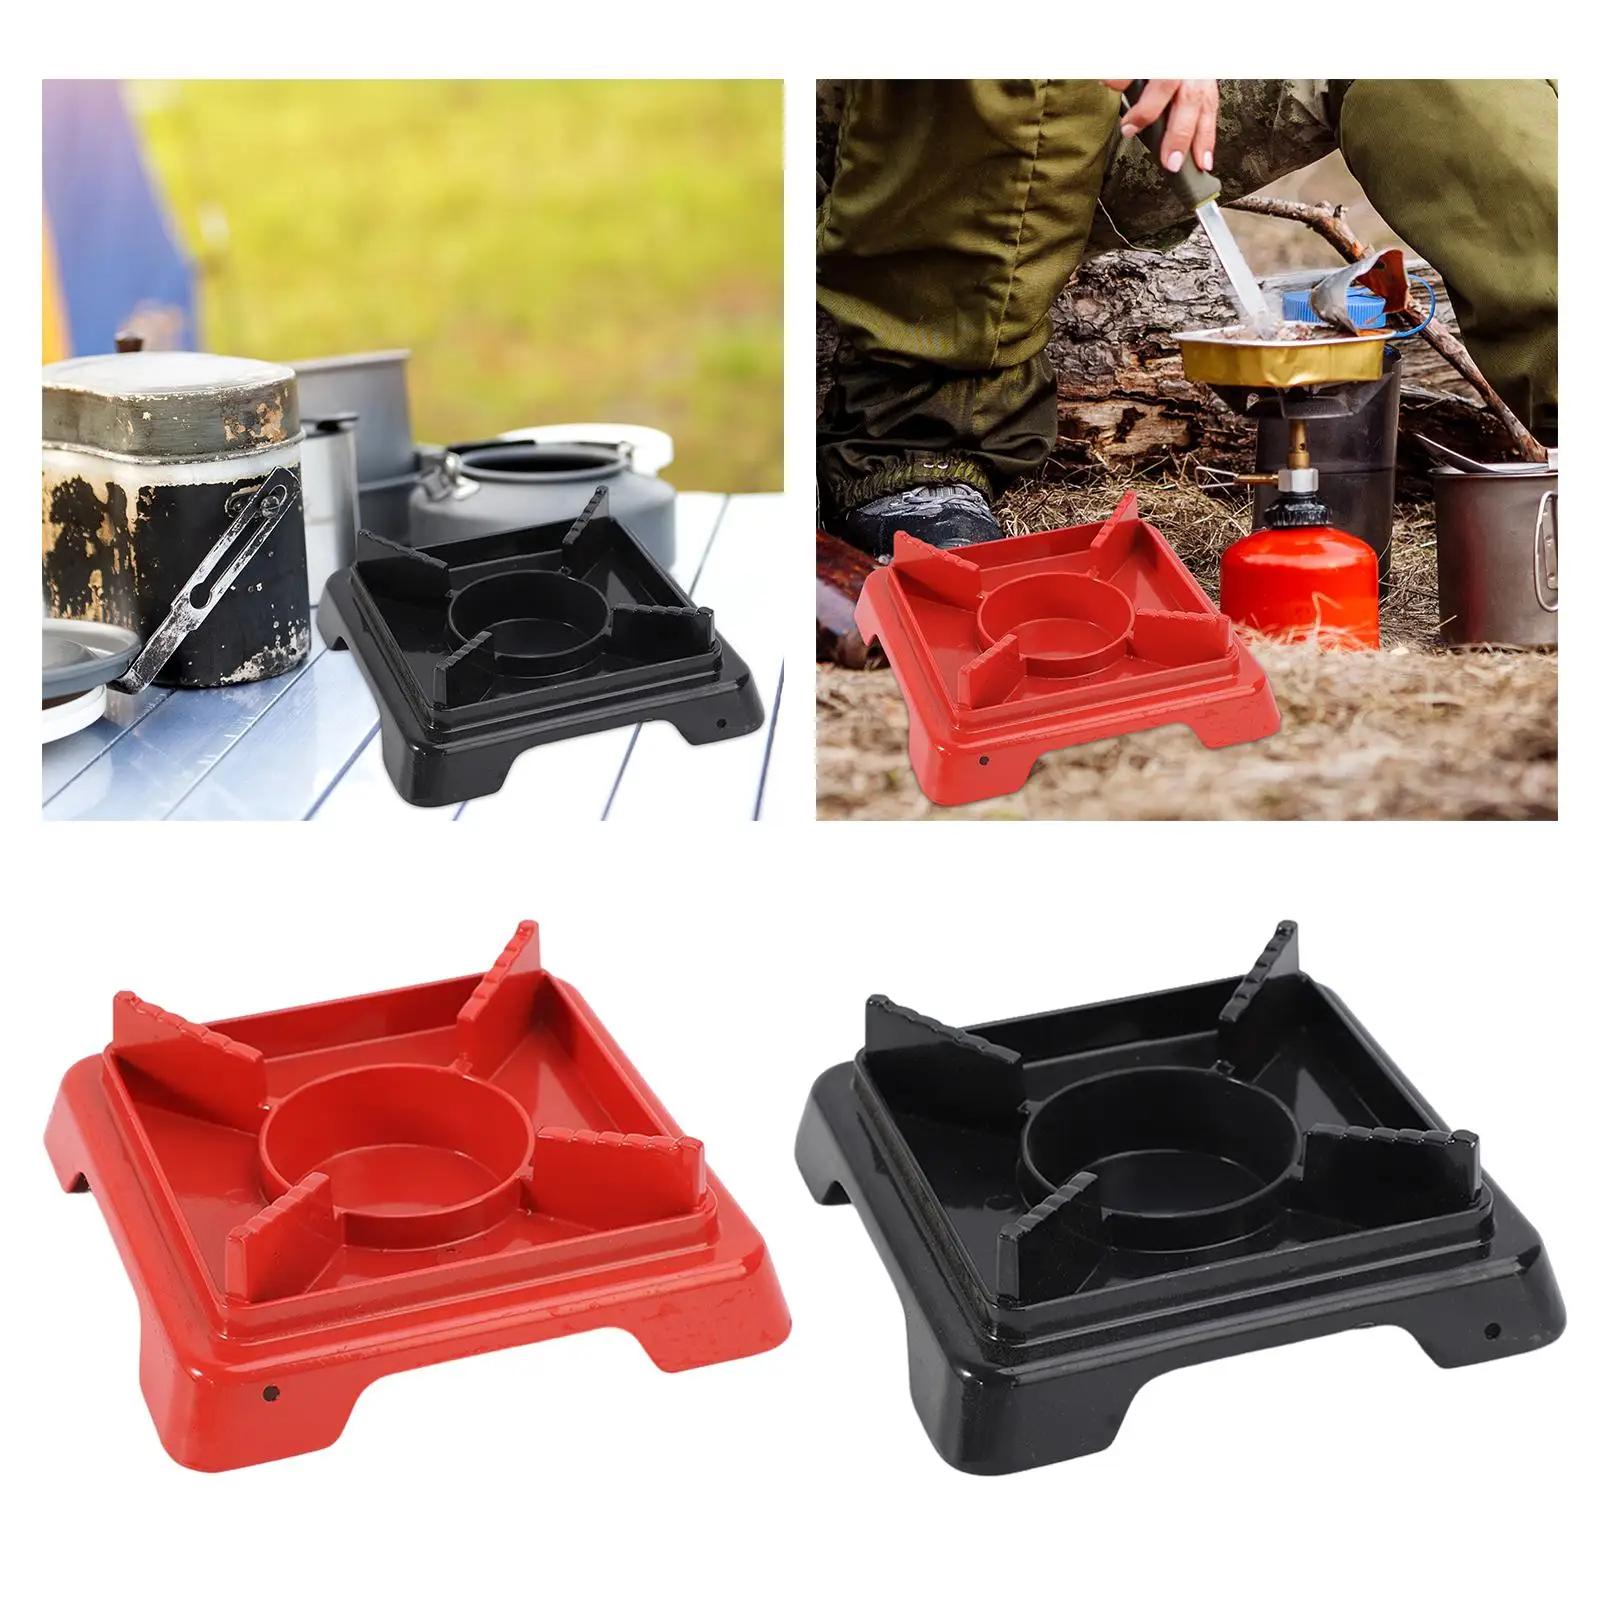 Camping Alcohol Stove Burner Lightweight Compact Cookware Fire Boiler for Kitchen Outside Activities Fishing Travel Cooking